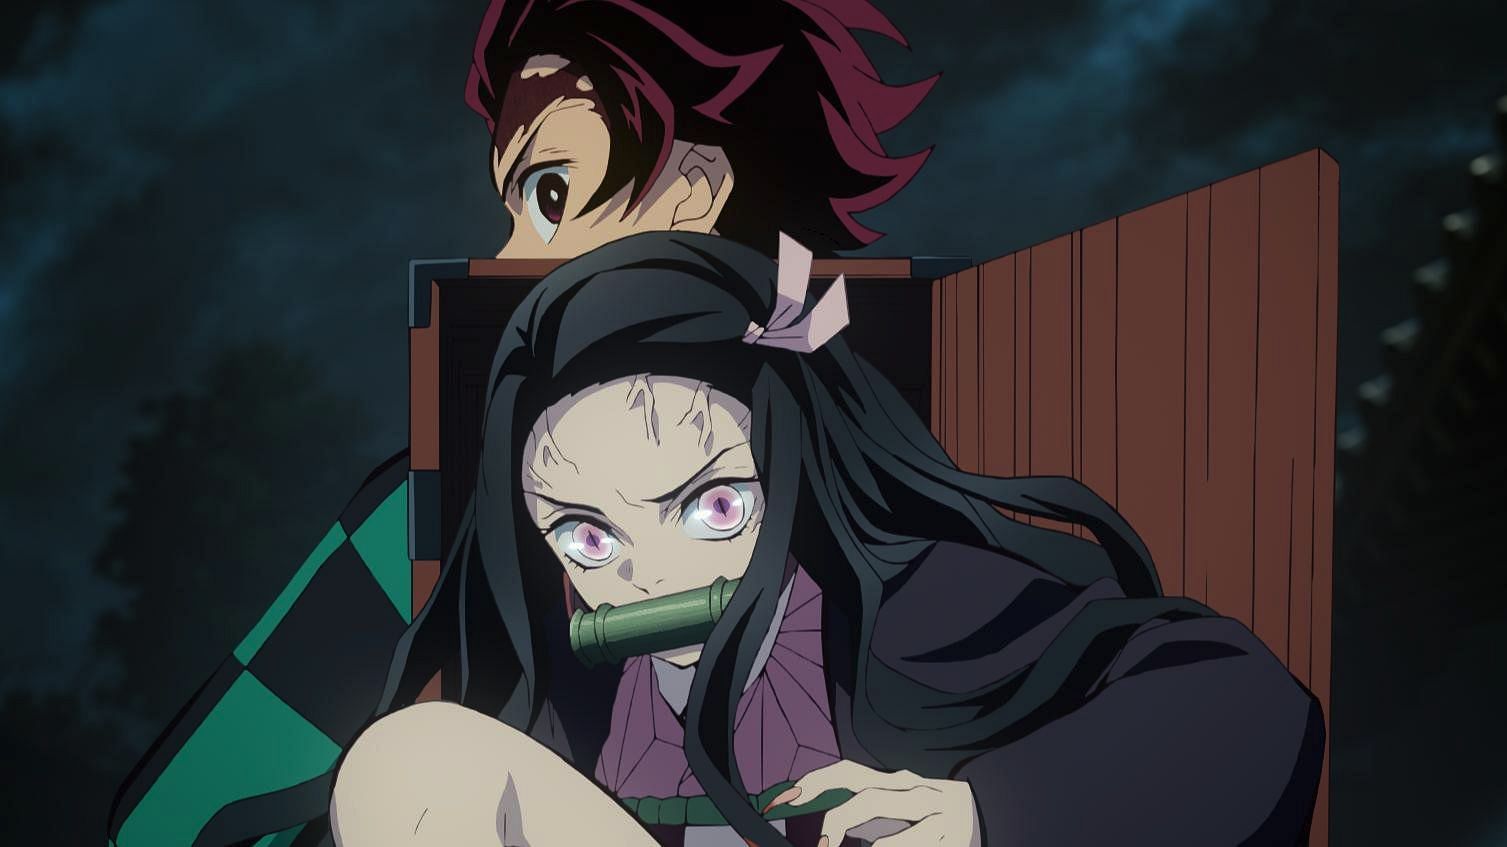 Some of the times Tanjiro and Nezuko have saved each other in the series (image via Ufotable)